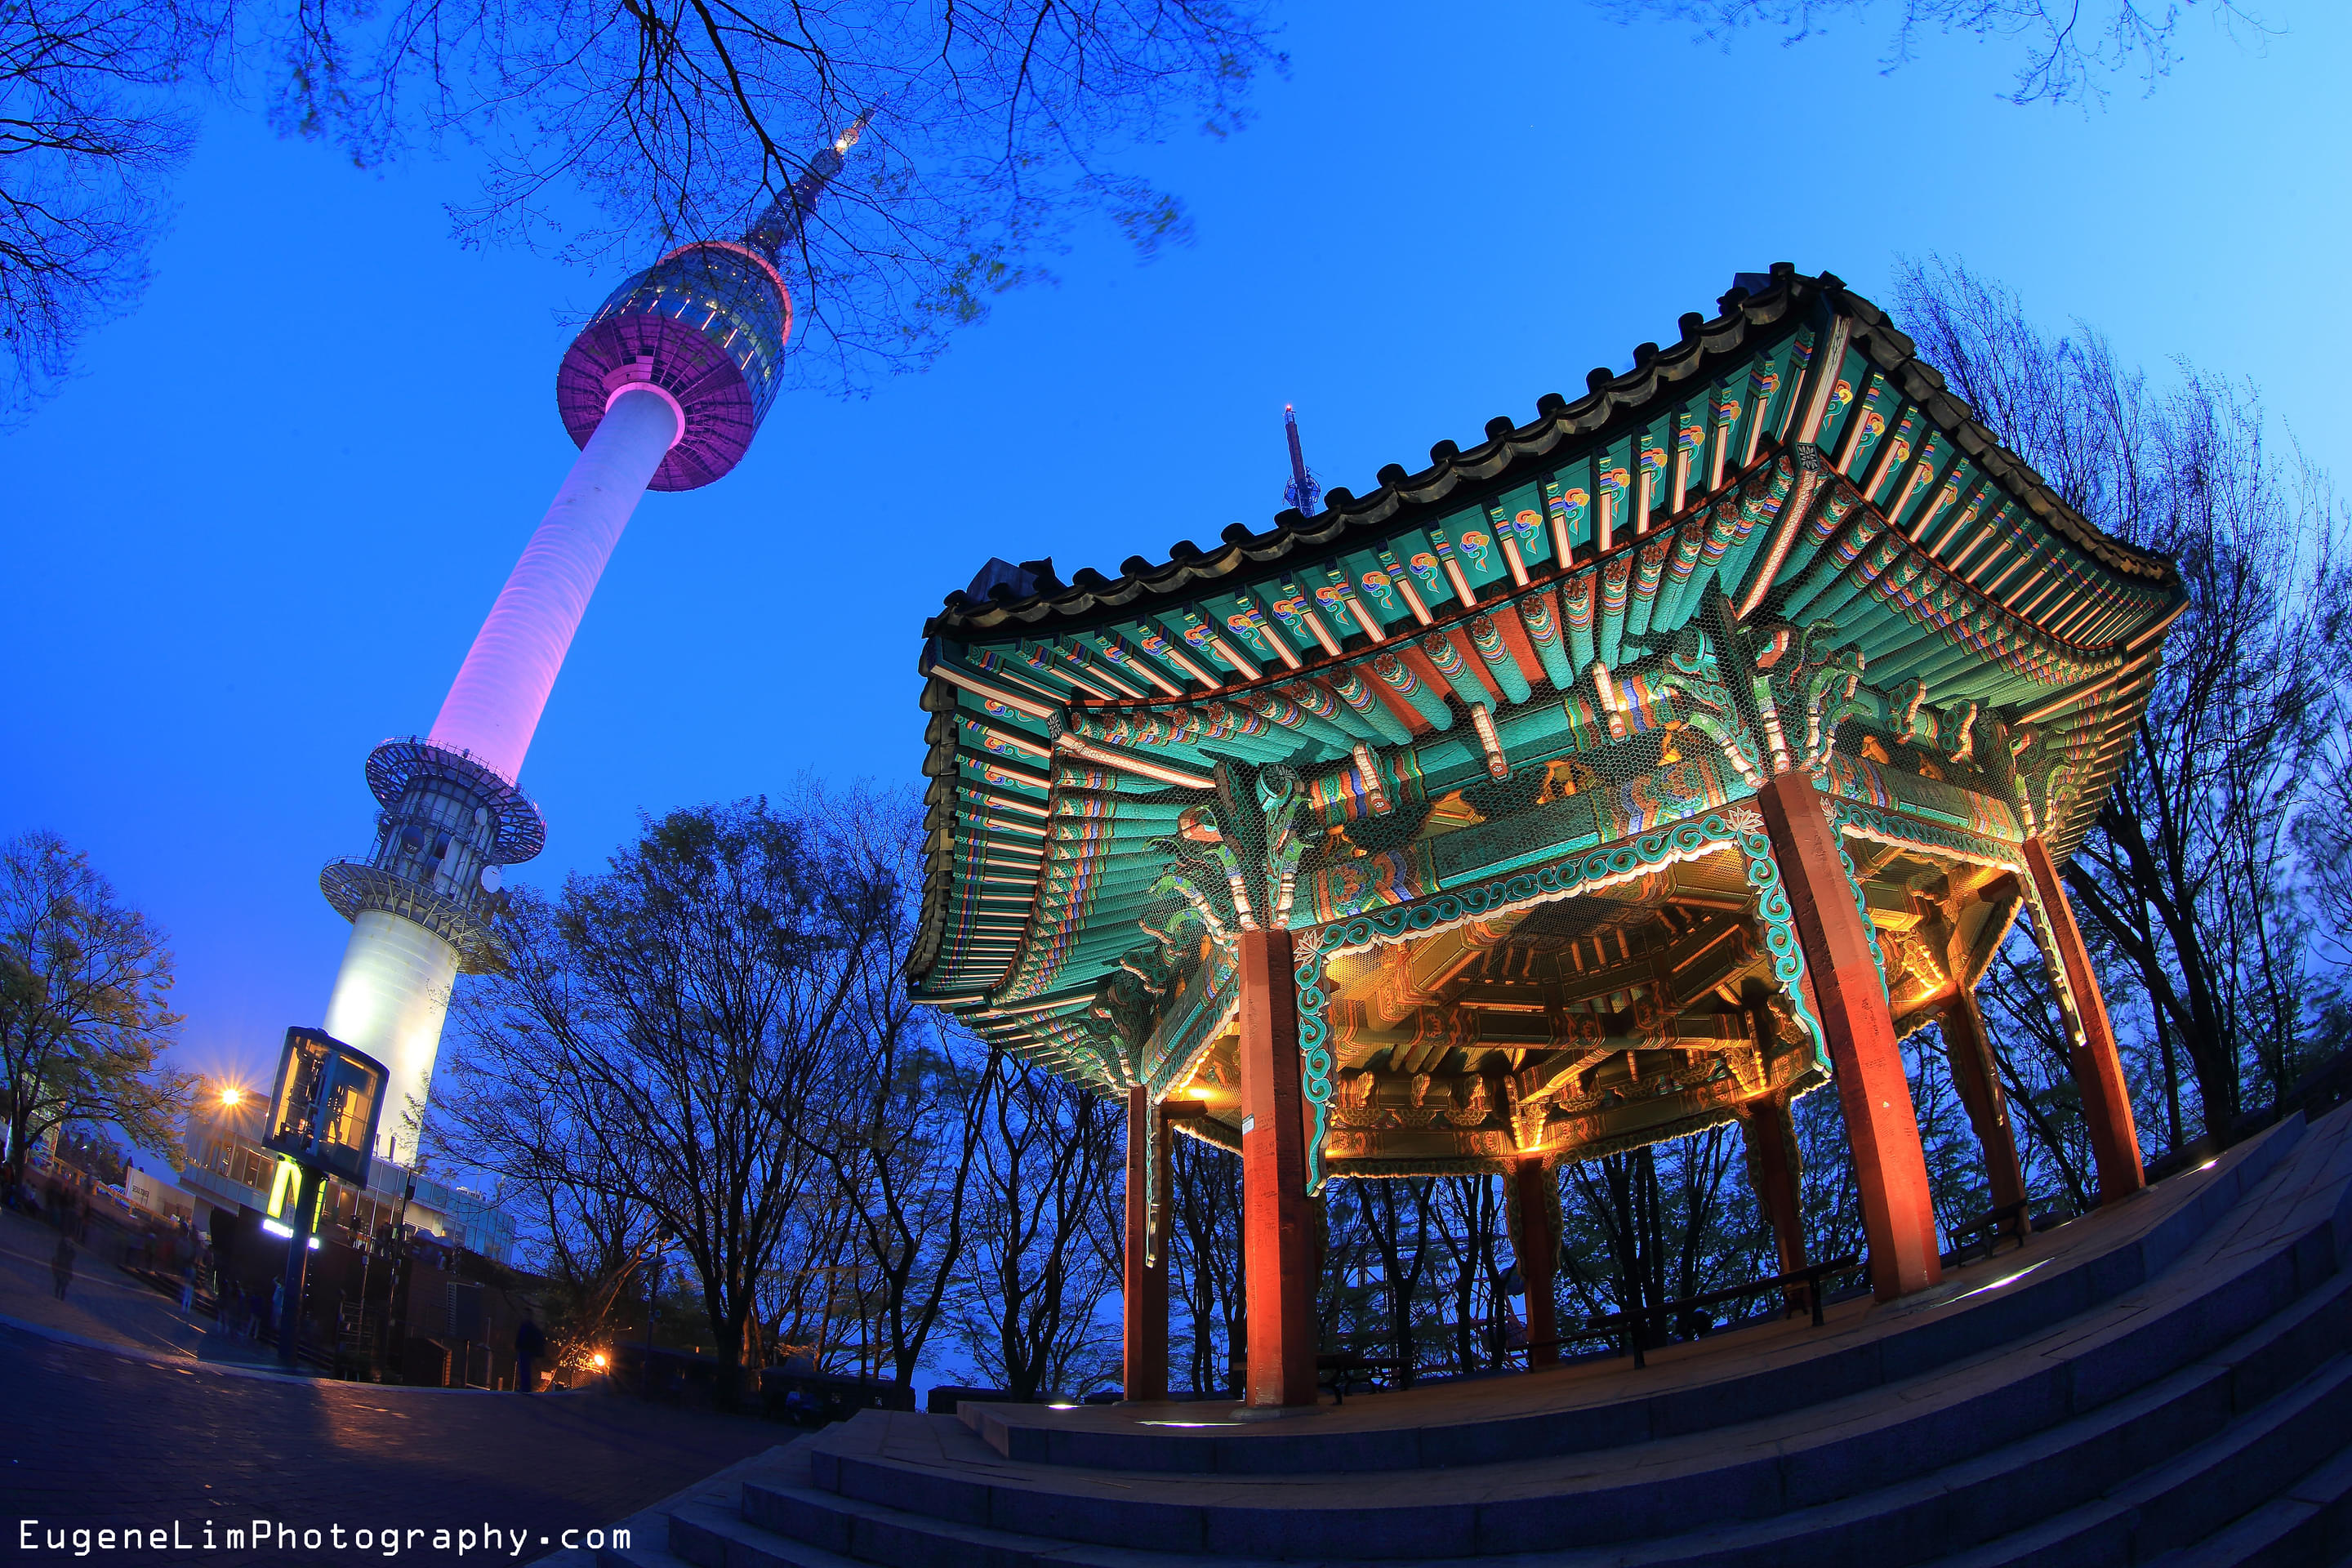 Namsan Seoul Tower Overview